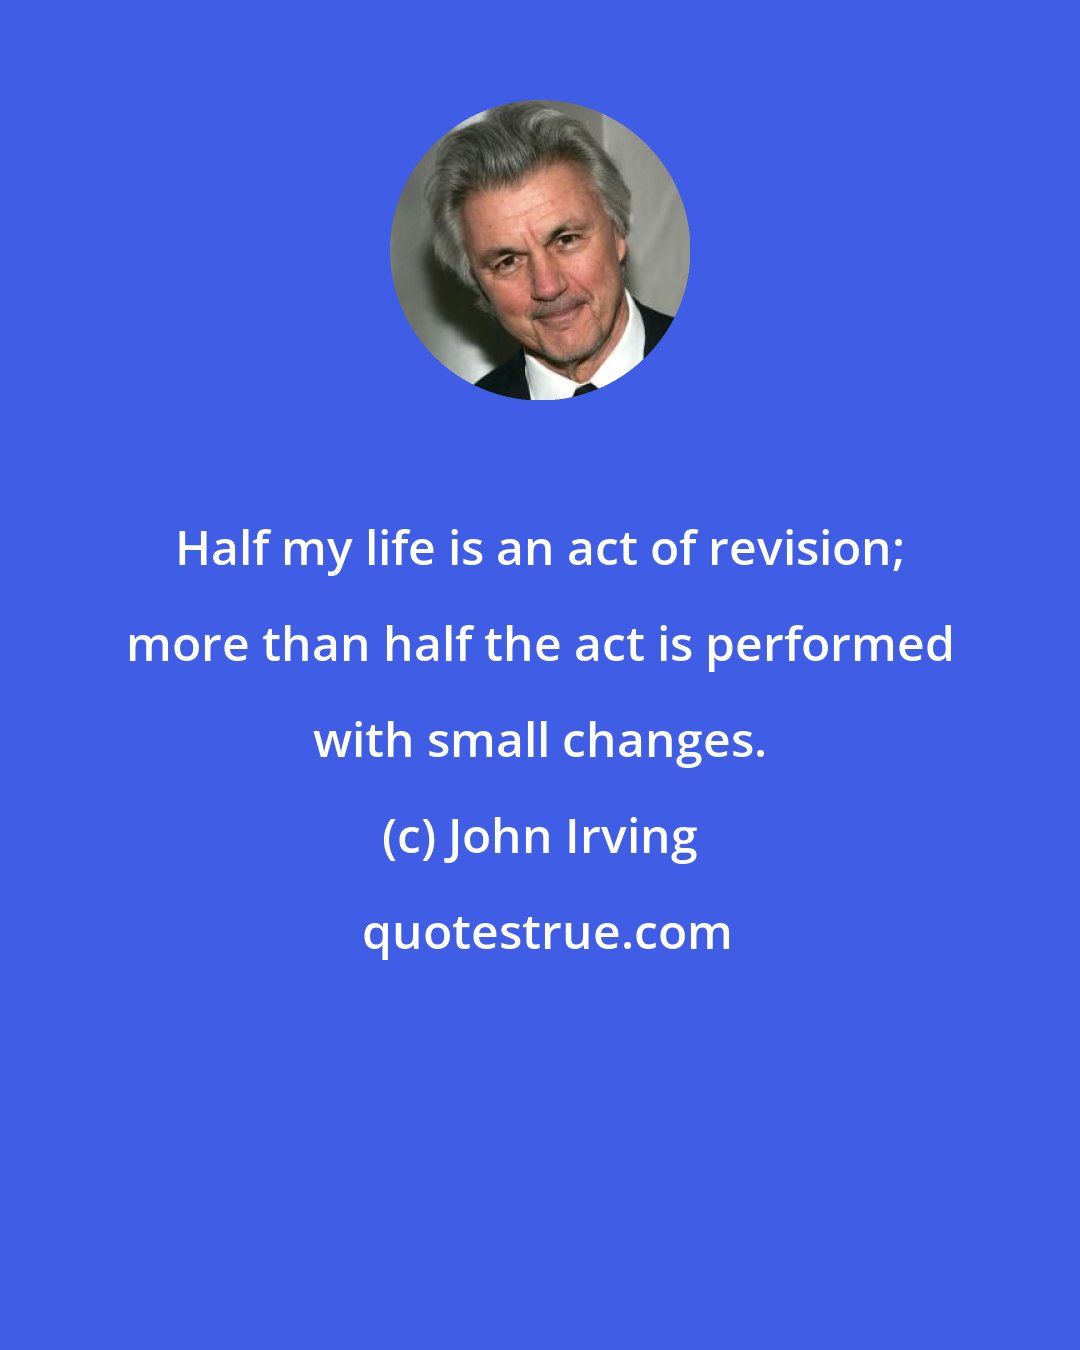 John Irving: Half my life is an act of revision; more than half the act is performed with small changes.